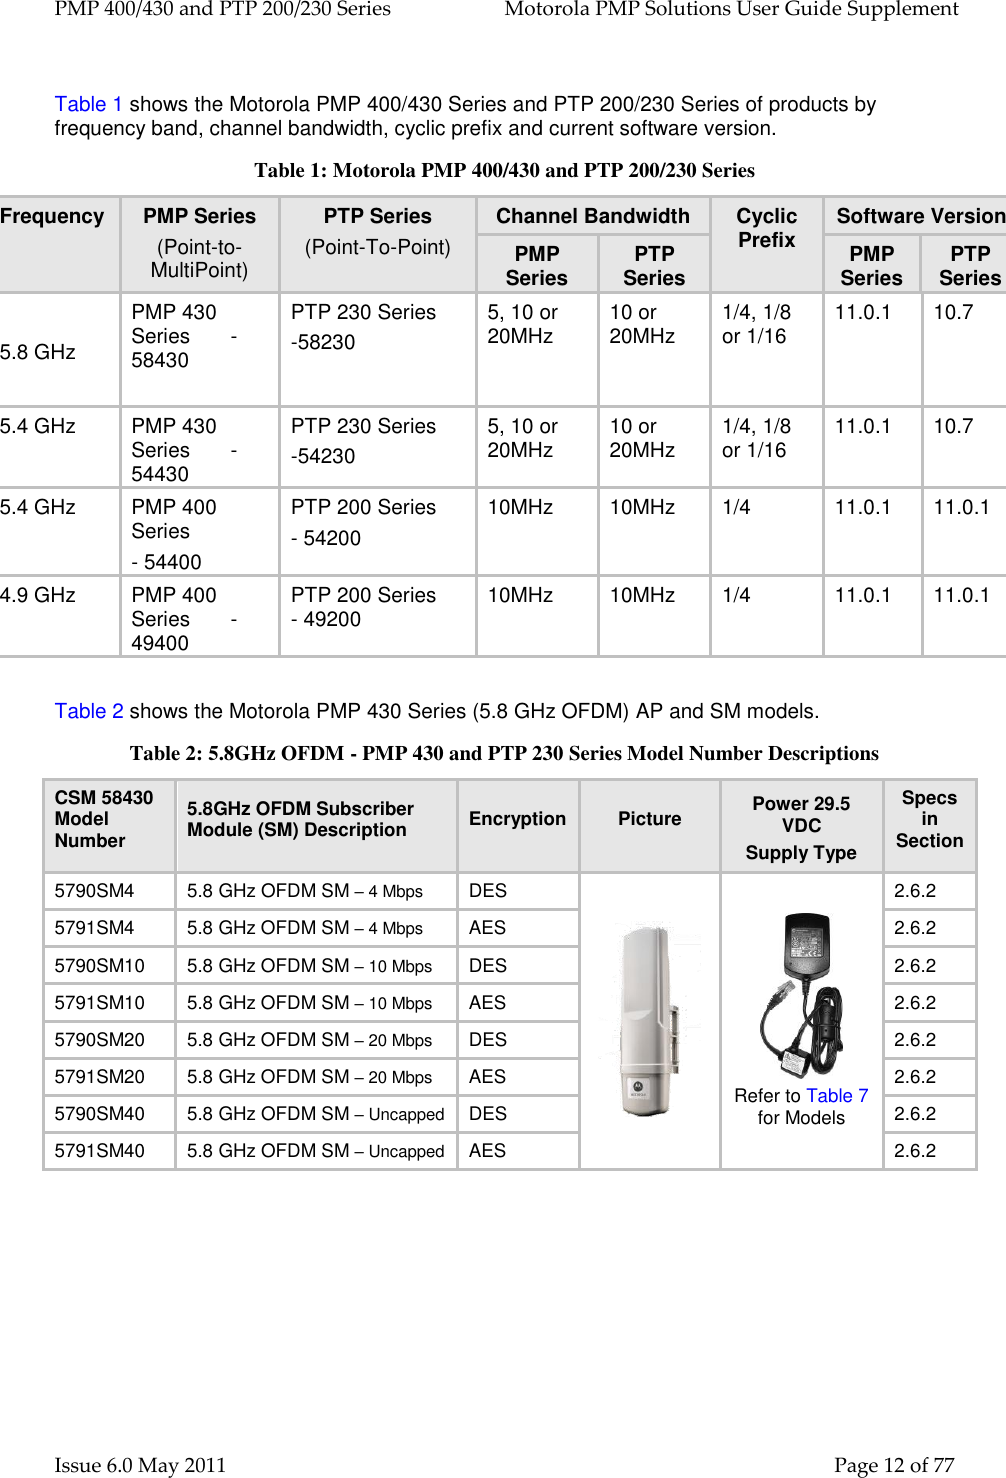 PMP 400/430 and PTP 200/230 Series   Motorola PMP Solutions User Guide Supplement Issue 6.0 May 2011    Page 12 of 77  Table 1 shows the Motorola PMP 400/430 Series and PTP 200/230 Series of products by frequency band, channel bandwidth, cyclic prefix and current software version. Table 1: Motorola PMP 400/430 and PTP 200/230 Series Frequency PMP Series  (Point-to-MultiPoint)     PTP Series  (Point-To-Point)  Channel Bandwidth Cyclic Prefix Software Version PMP Series PTP Series PMP Series PTP Series 5.8 GHz PMP 430 Series       - 58430 PTP 230 Series -58230 5, 10 or 20MHz 10 or 20MHz 1/4, 1/8 or 1/16 11.0.1 10.7 5.4 GHz PMP 430 Series       - 54430 PTP 230 Series -54230 5, 10 or 20MHz 10 or 20MHz 1/4, 1/8 or 1/16 11.0.1 10.7 5.4 GHz PMP 400 Series - 54400 PTP 200 Series - 54200 10MHz 10MHz 1/4 11.0.1 11.0.1 4.9 GHz PMP 400 Series       - 49400 PTP 200 Series     - 49200 10MHz 10MHz 1/4 11.0.1 11.0.1  Table 2 shows the Motorola PMP 430 Series (5.8 GHz OFDM) AP and SM models. Table 2: 5.8GHz OFDM - PMP 430 and PTP 230 Series Model Number Descriptions CSM 58430 Model Number 5.8GHz OFDM Subscriber Module (SM) Description Encryption Picture Power 29.5 VDC Supply Type Specs in Section 5790SM4 5.8 GHz OFDM SM – 4 Mbps DES   Refer to Table 7 for Models 2.6.2 5791SM4 5.8 GHz OFDM SM – 4 Mbps AES 2.6.2 5790SM10 5.8 GHz OFDM SM – 10 Mbps DES 2.6.2 5791SM10 5.8 GHz OFDM SM – 10 Mbps AES 2.6.2 5790SM20 5.8 GHz OFDM SM – 20 Mbps DES 2.6.2 5791SM20 5.8 GHz OFDM SM – 20 Mbps AES 2.6.2 5790SM40 5.8 GHz OFDM SM – Uncapped DES 2.6.2 5791SM40 5.8 GHz OFDM SM – Uncapped AES 2.6.2 